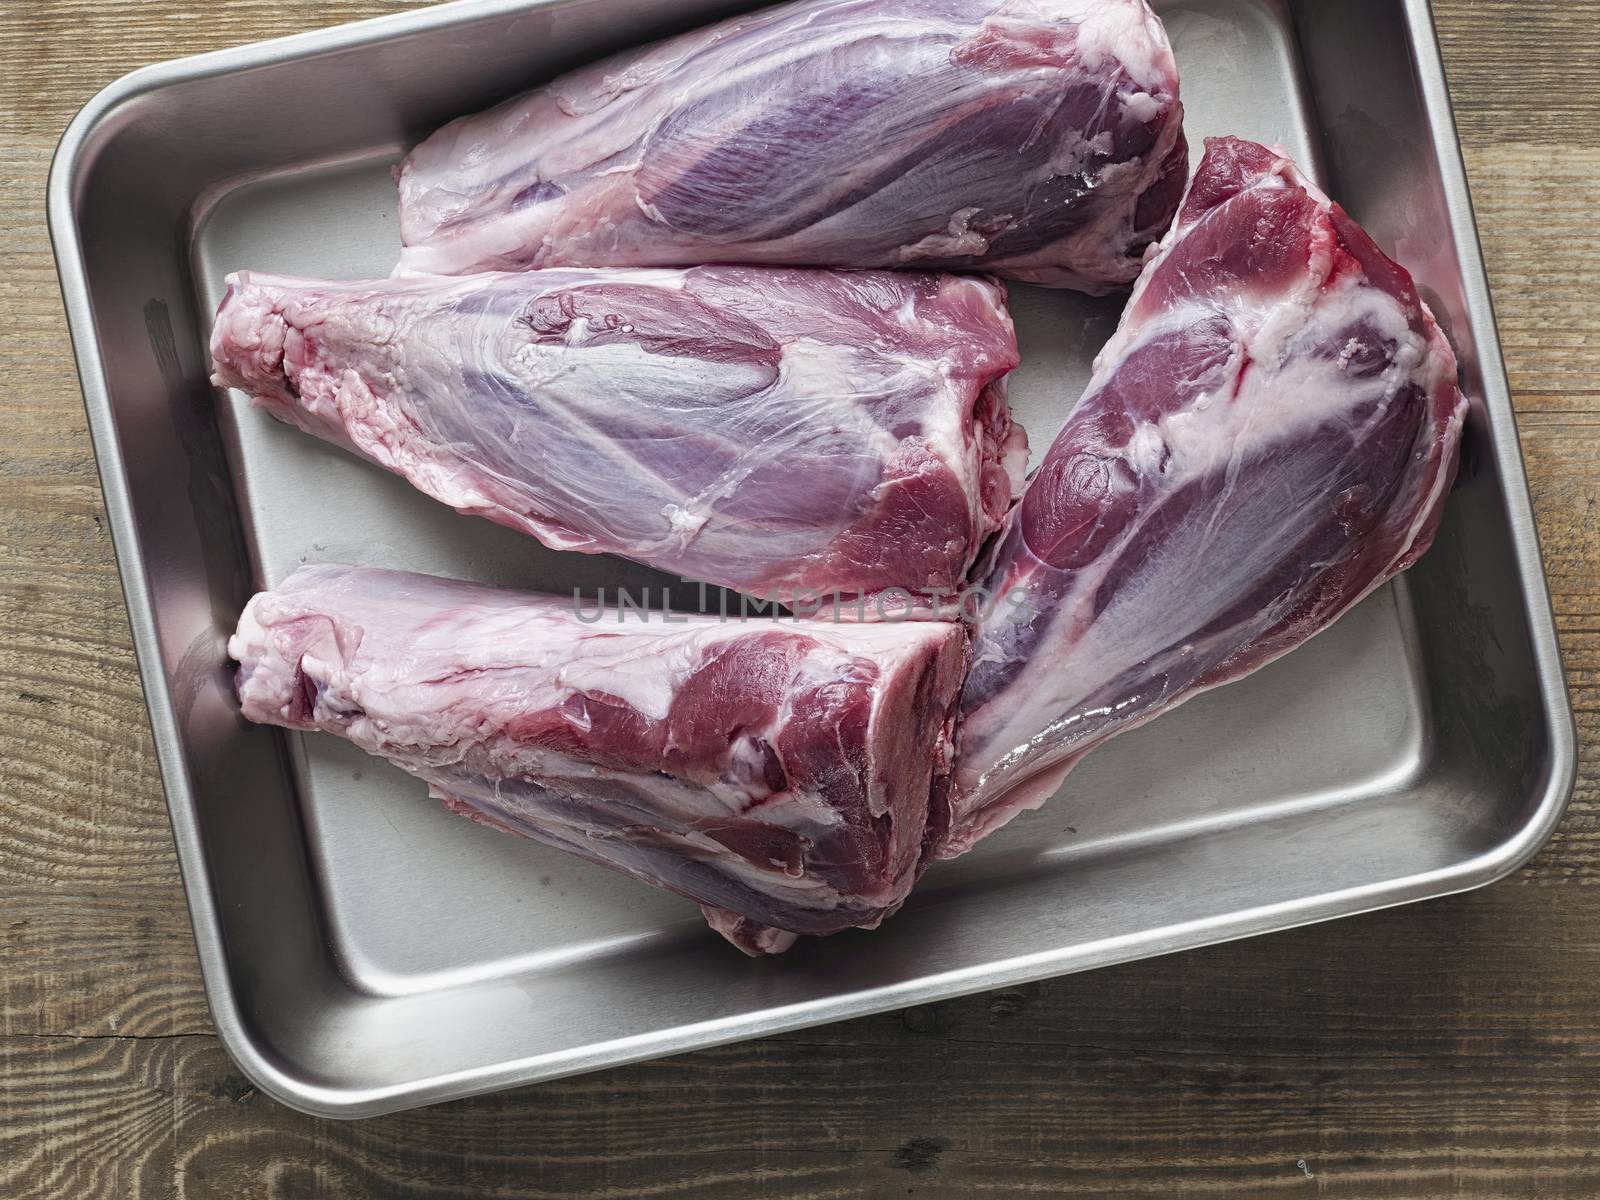 rustic uncooked lamb shank by zkruger